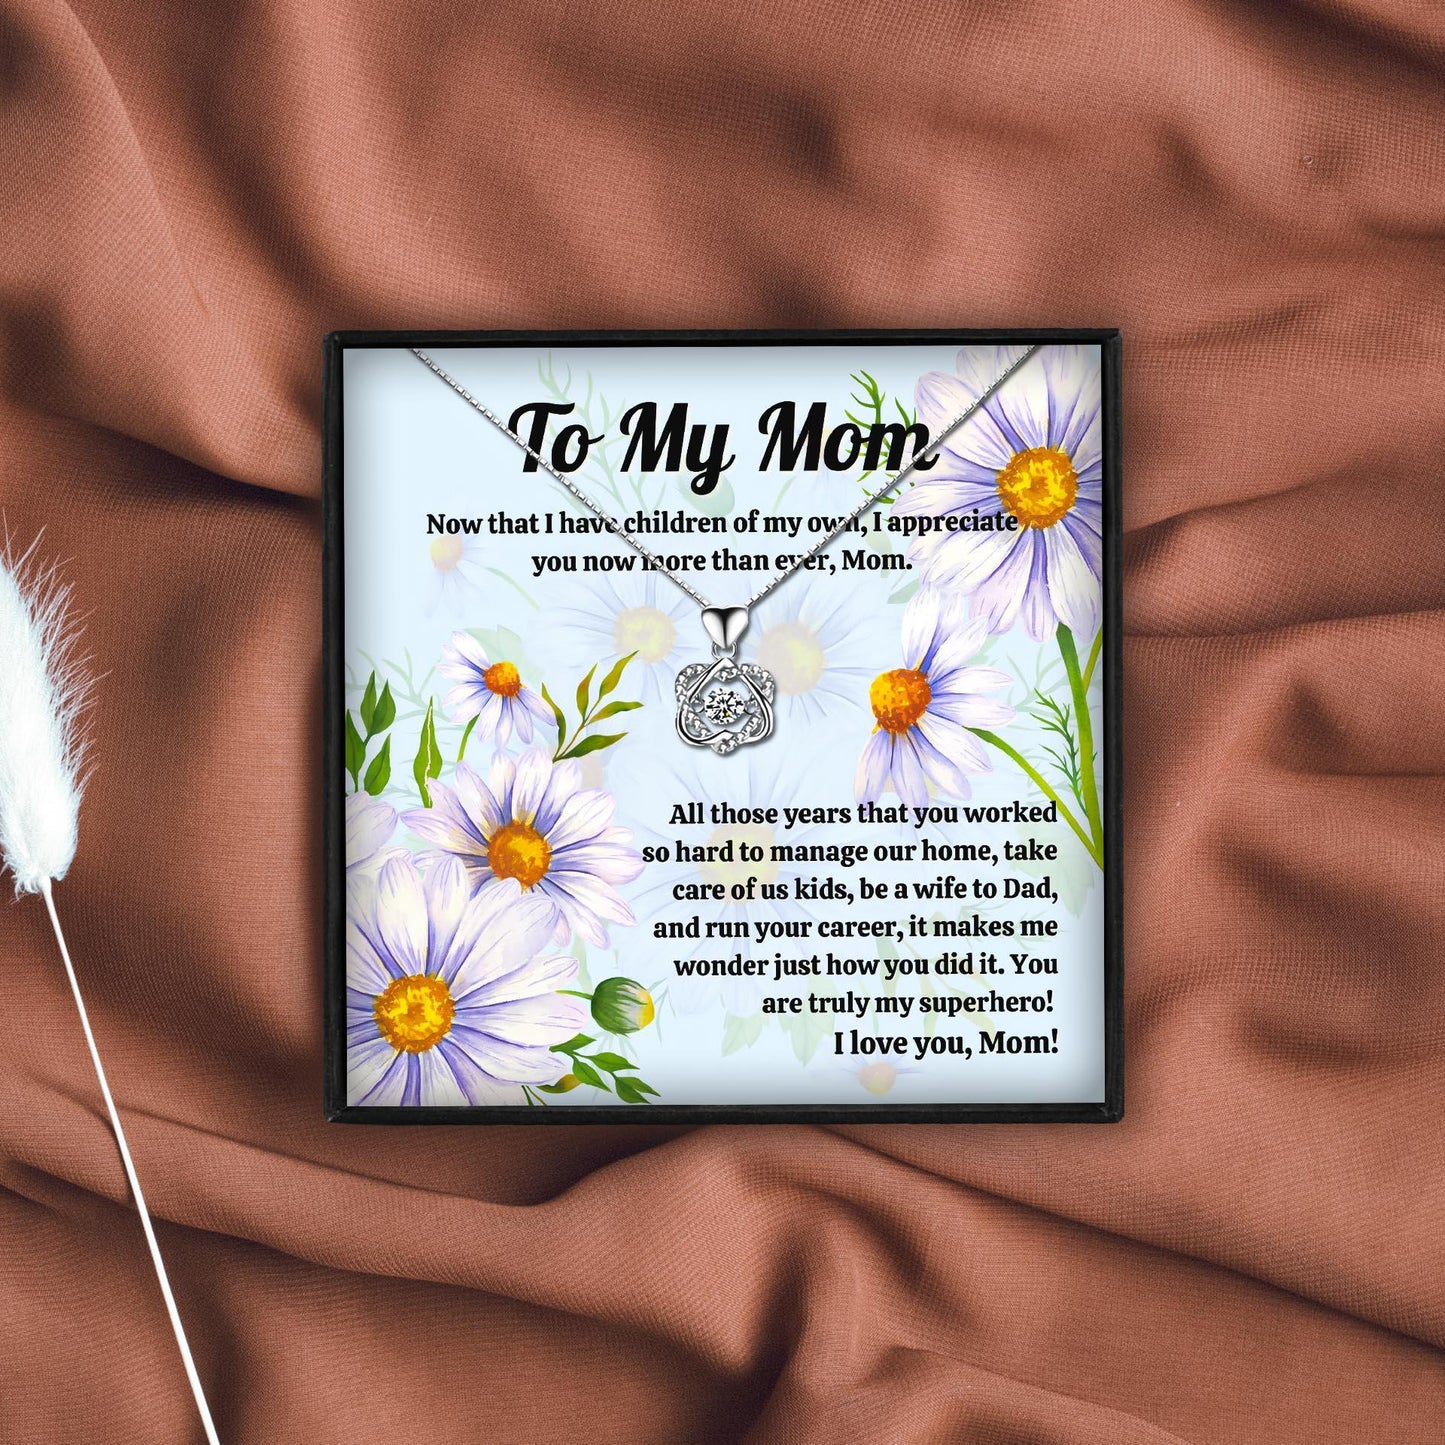 To My Wonderful Lovely Mom Necklace Gift Necklace for Christmas 2023 | To My Wonderful Lovely Mom Necklace Gift Necklace - undefined | gift, gift for mom, gift ideas, Gift Necklace, Gifts, Gifts for Bonus Mom, mom birthday gift, mom gift, mom gift ideas, Mom Necklace, Mom Necklace Gift, necklace, Necklaces, other necklace | From Hunny Life | hunnylife.com